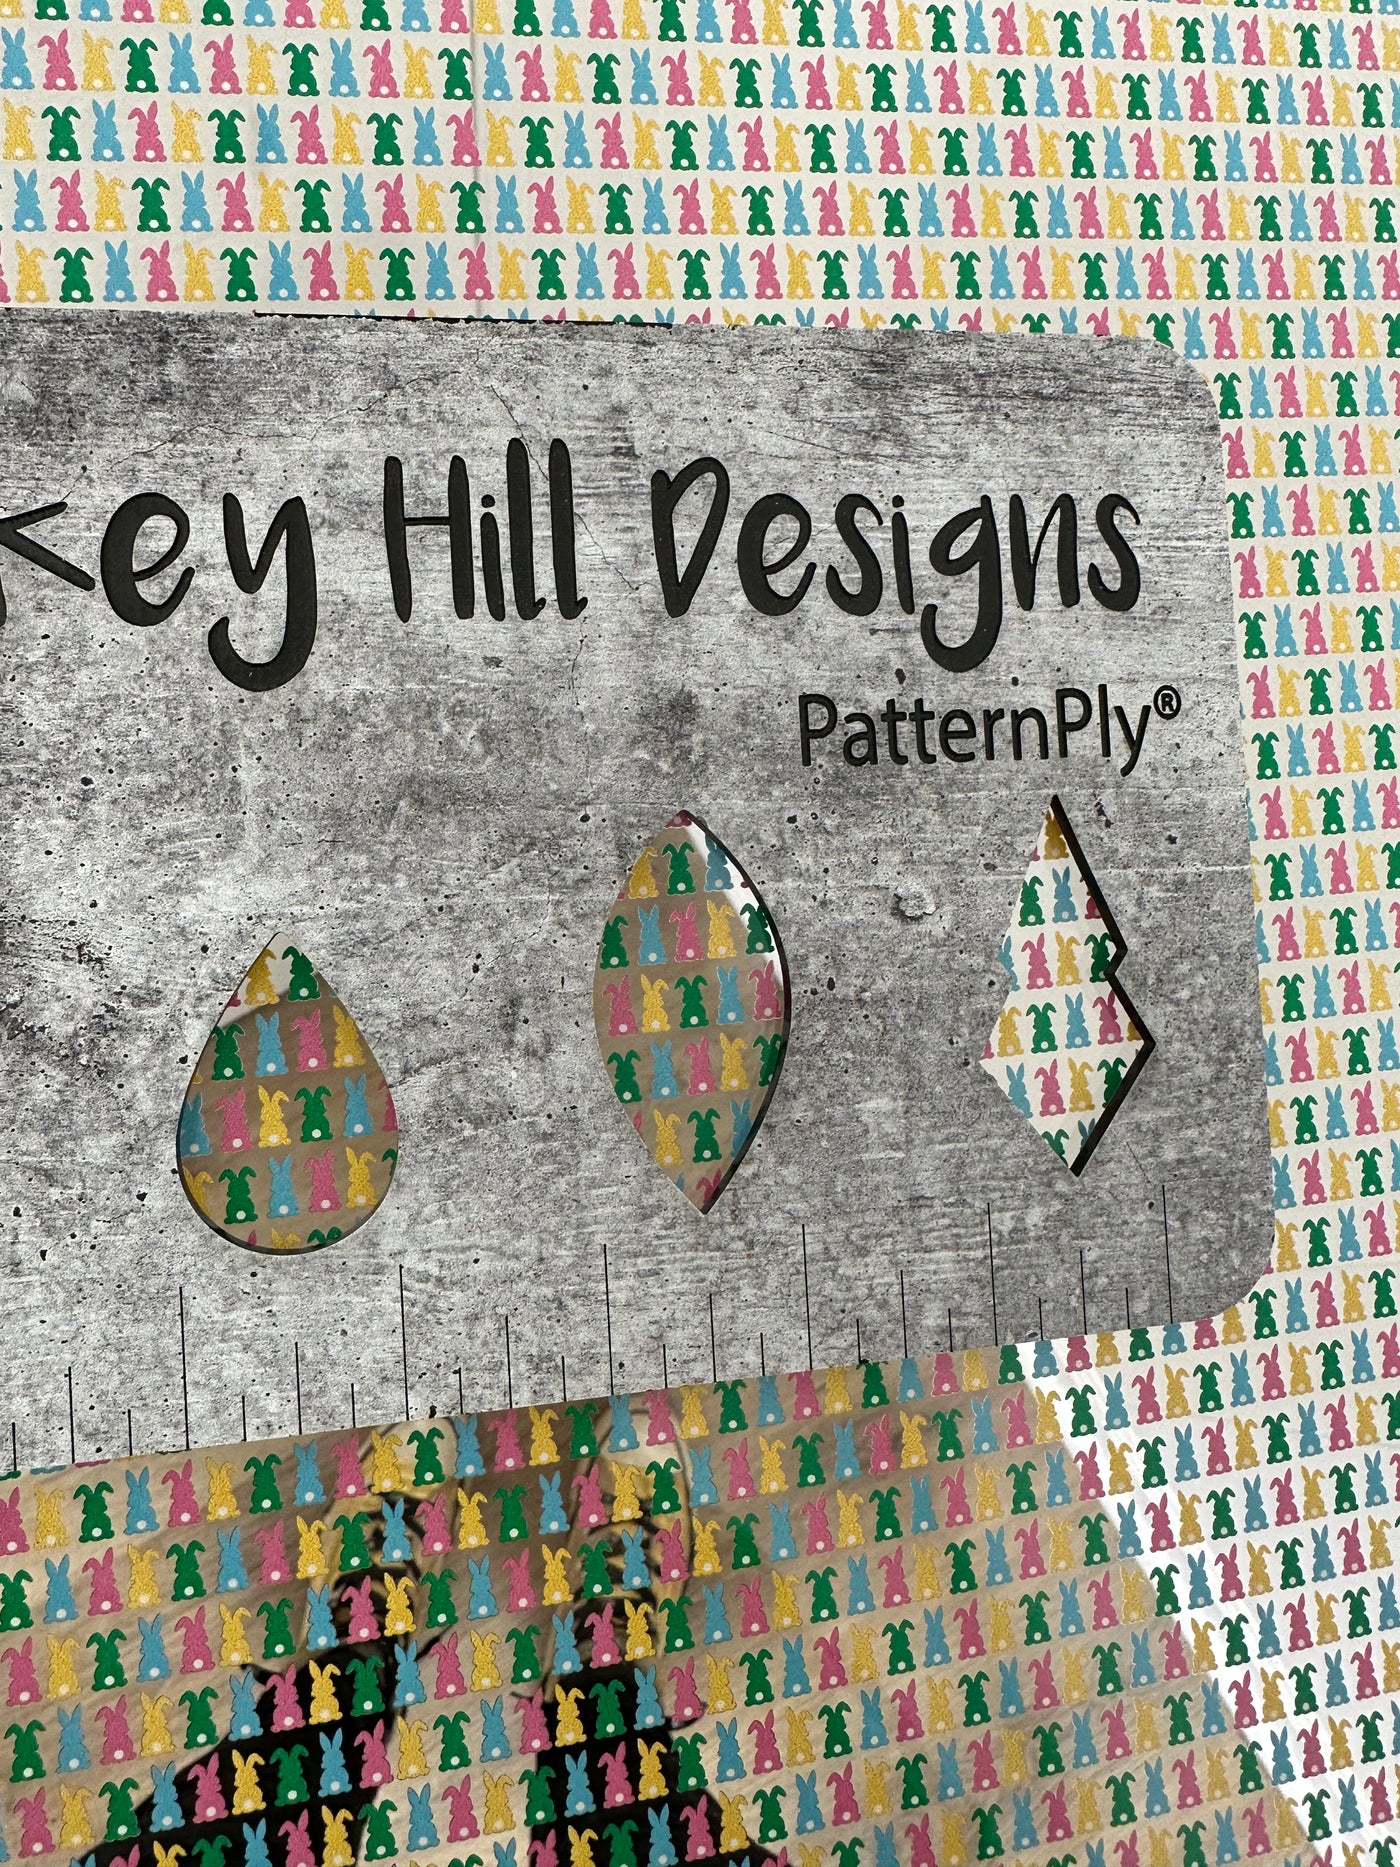 PatternPly® Scattered Bunny Butts